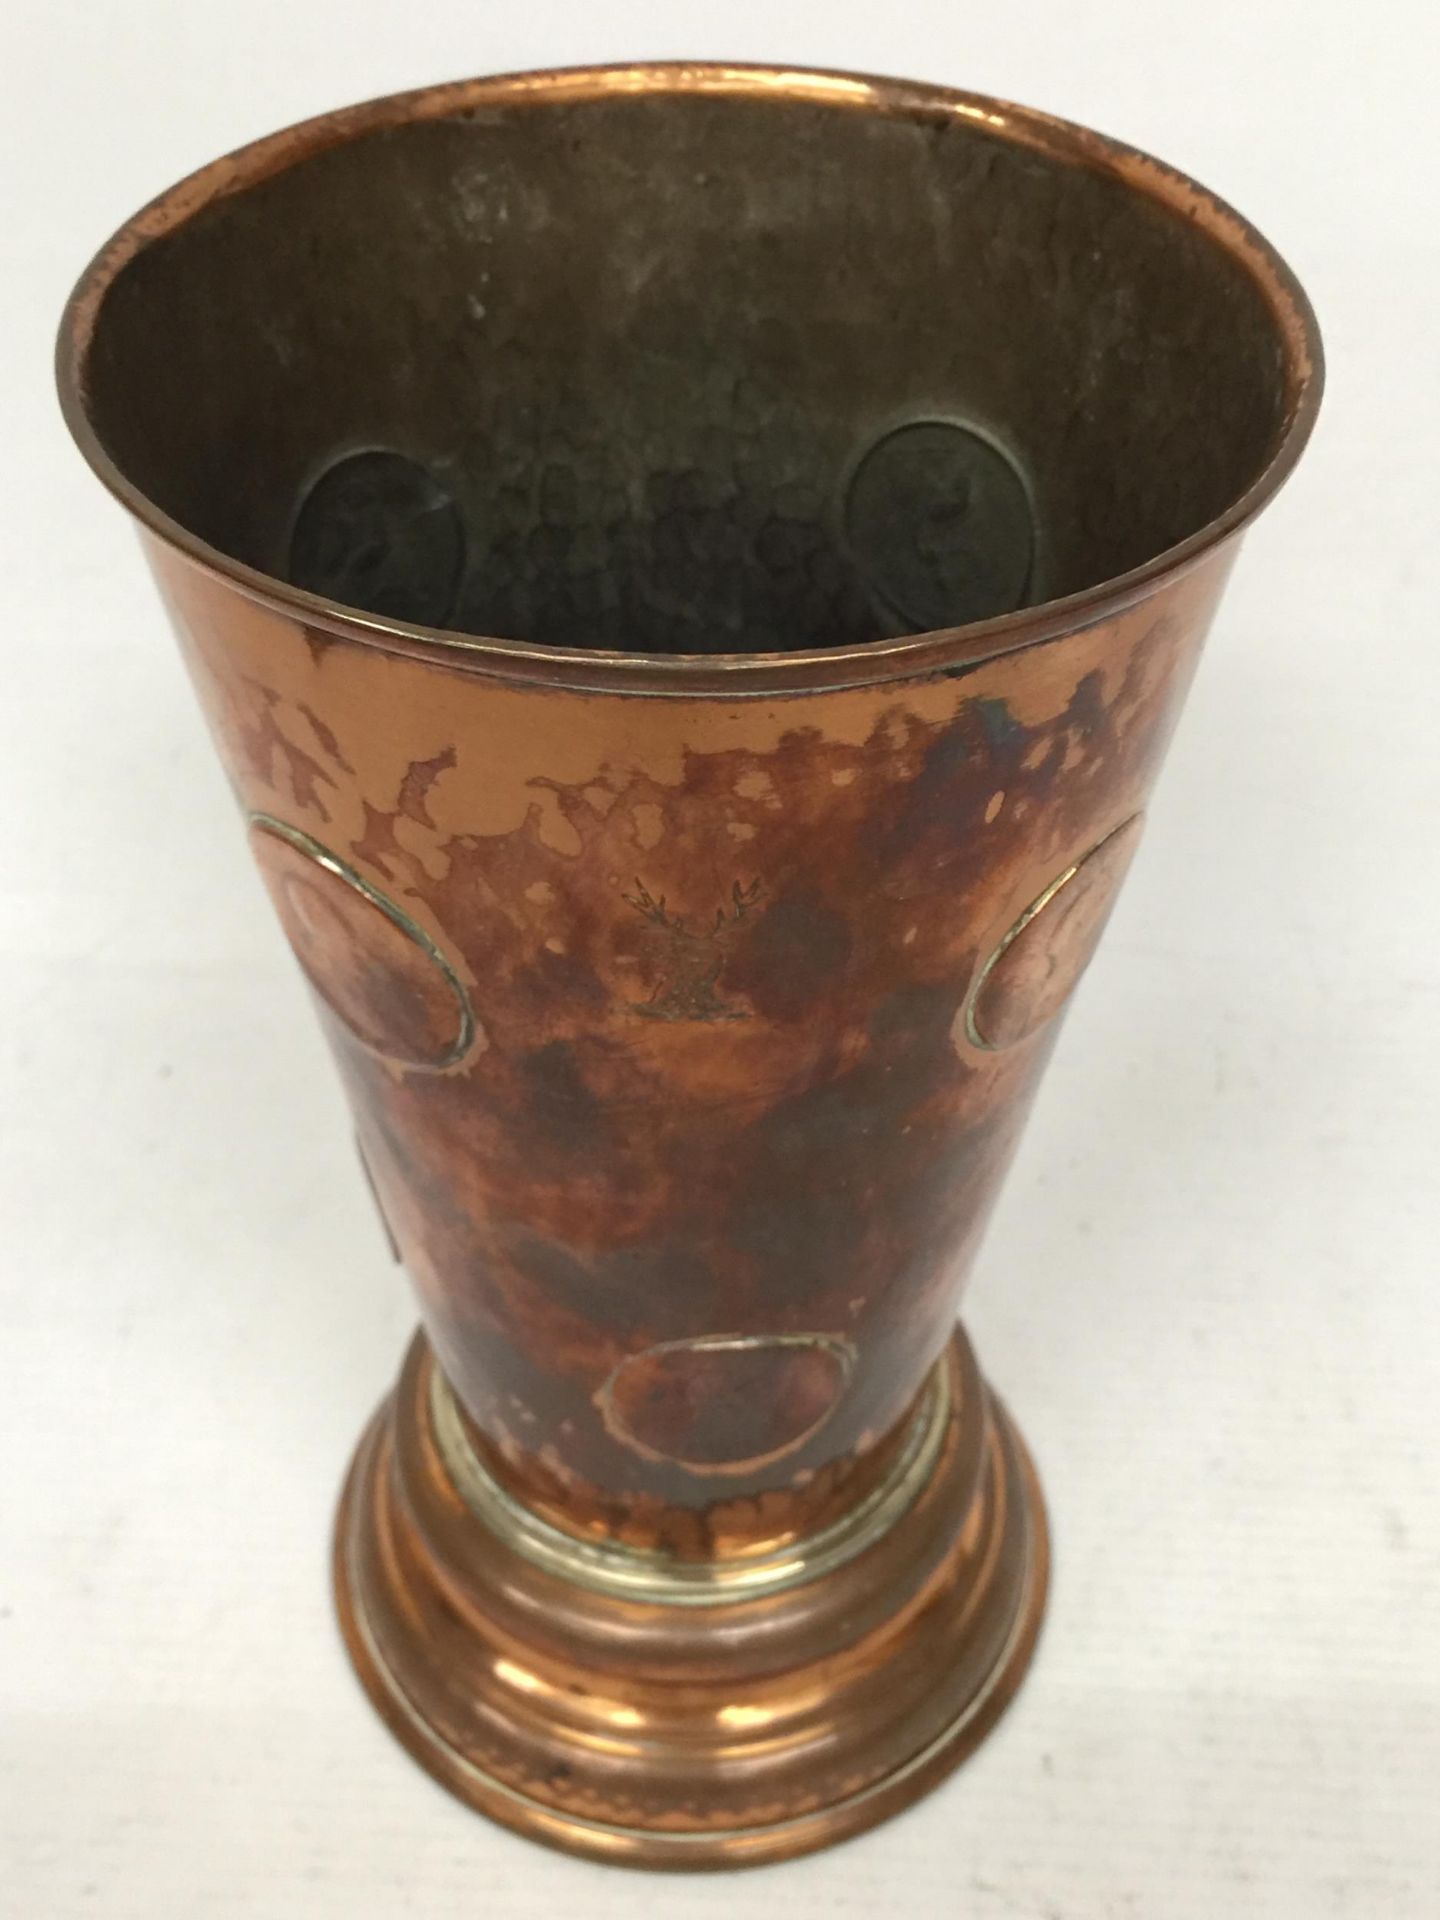 A VINTAGE COPPER GAMBLING TAVERN DICE SHAKING BEAKER EMBEDDED WITH COINS AND DICE BENEATH A GLASS - Image 2 of 3